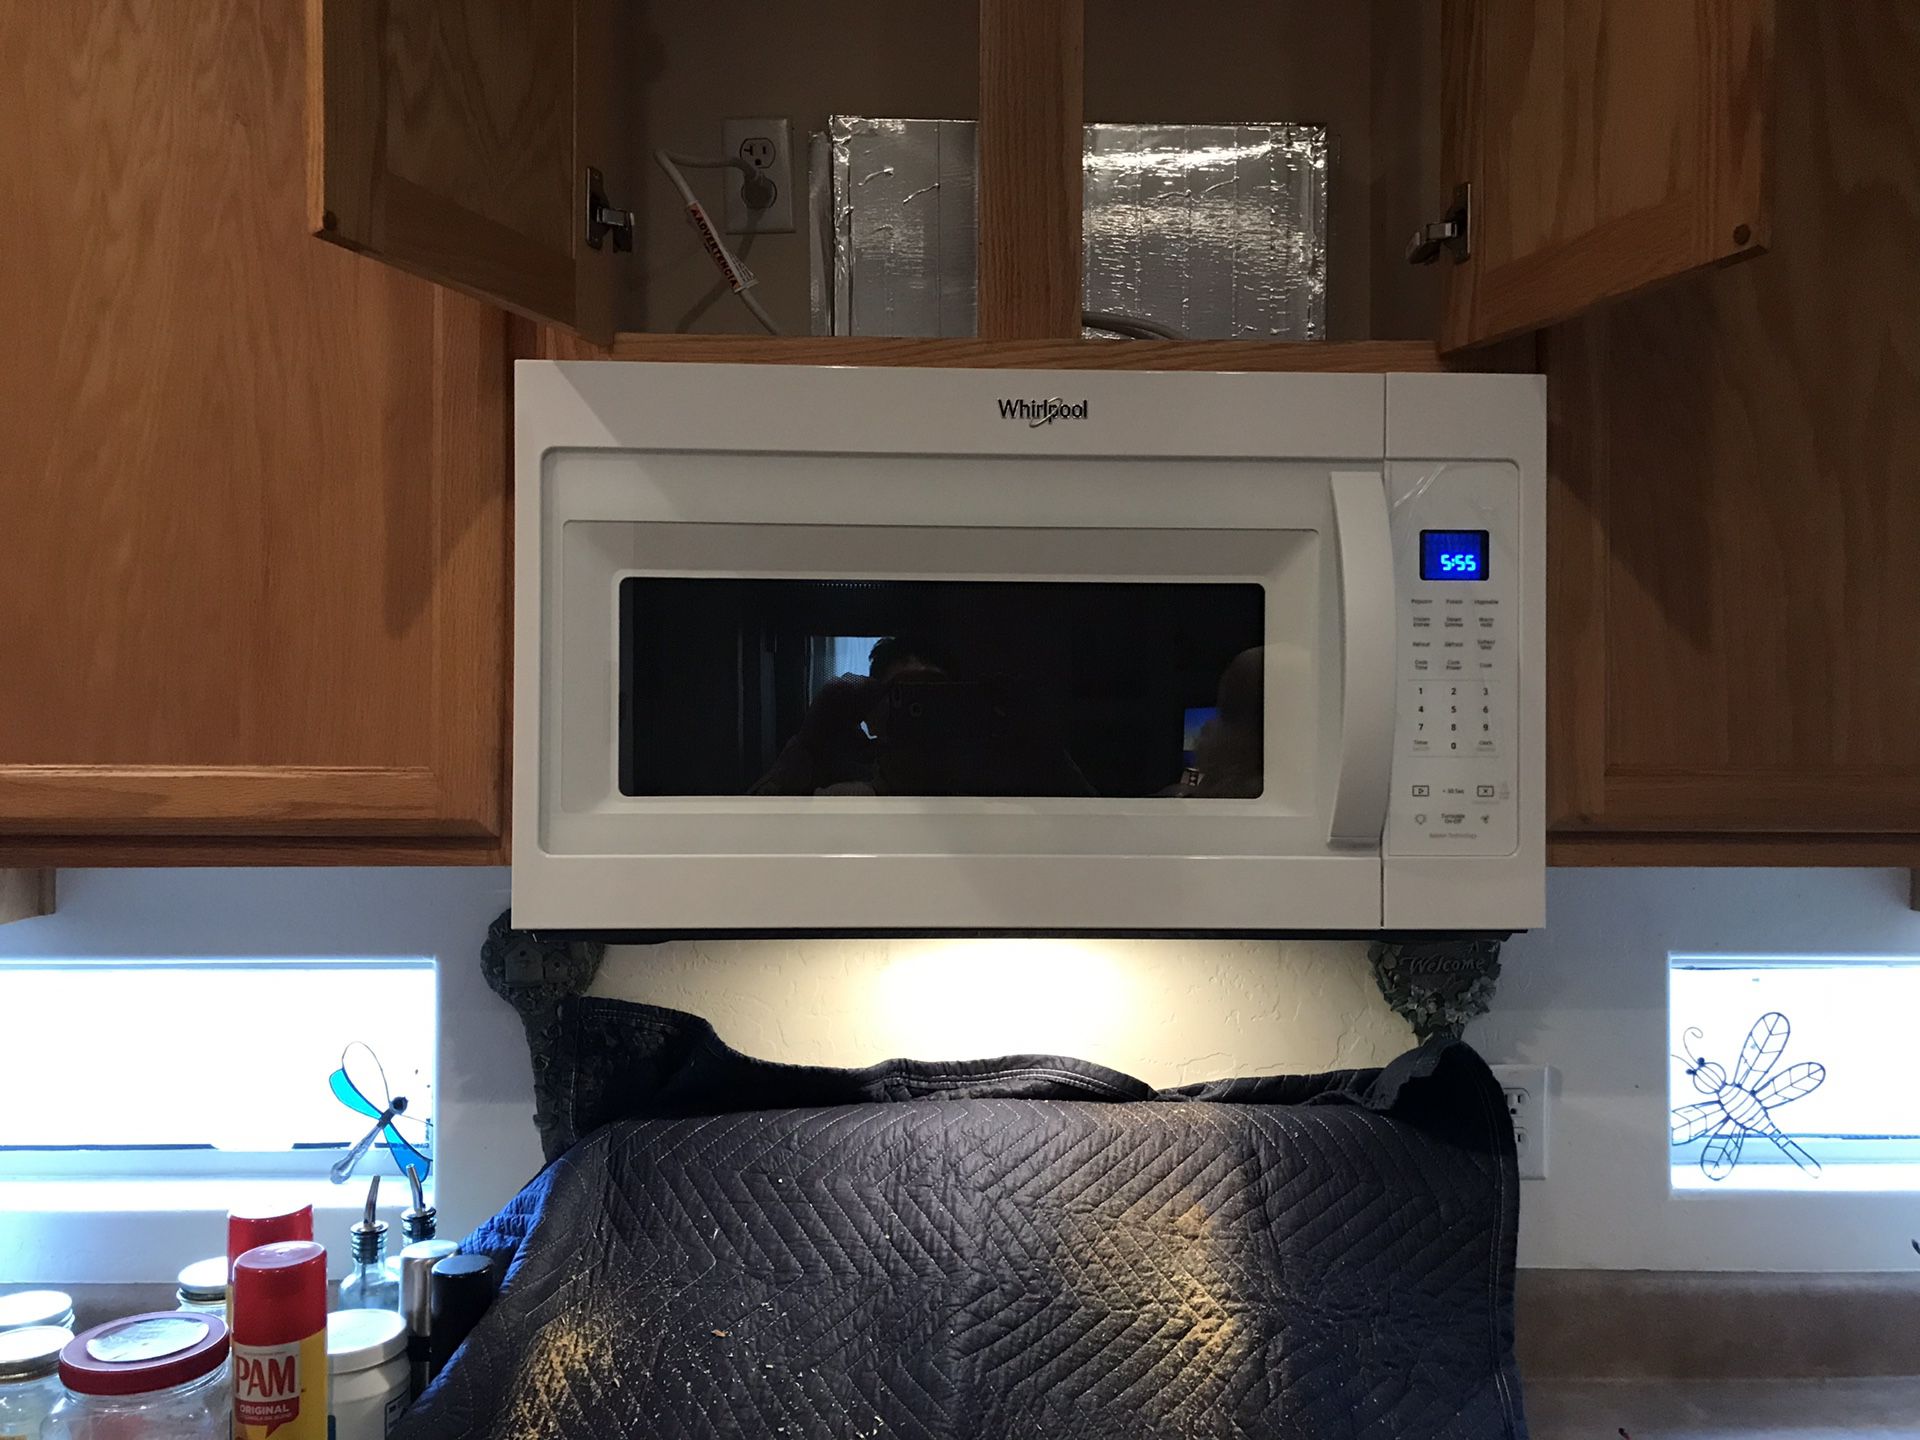 Microwaves Wall mount Installations for Sale in Scottsdale, AZ - OfferUp